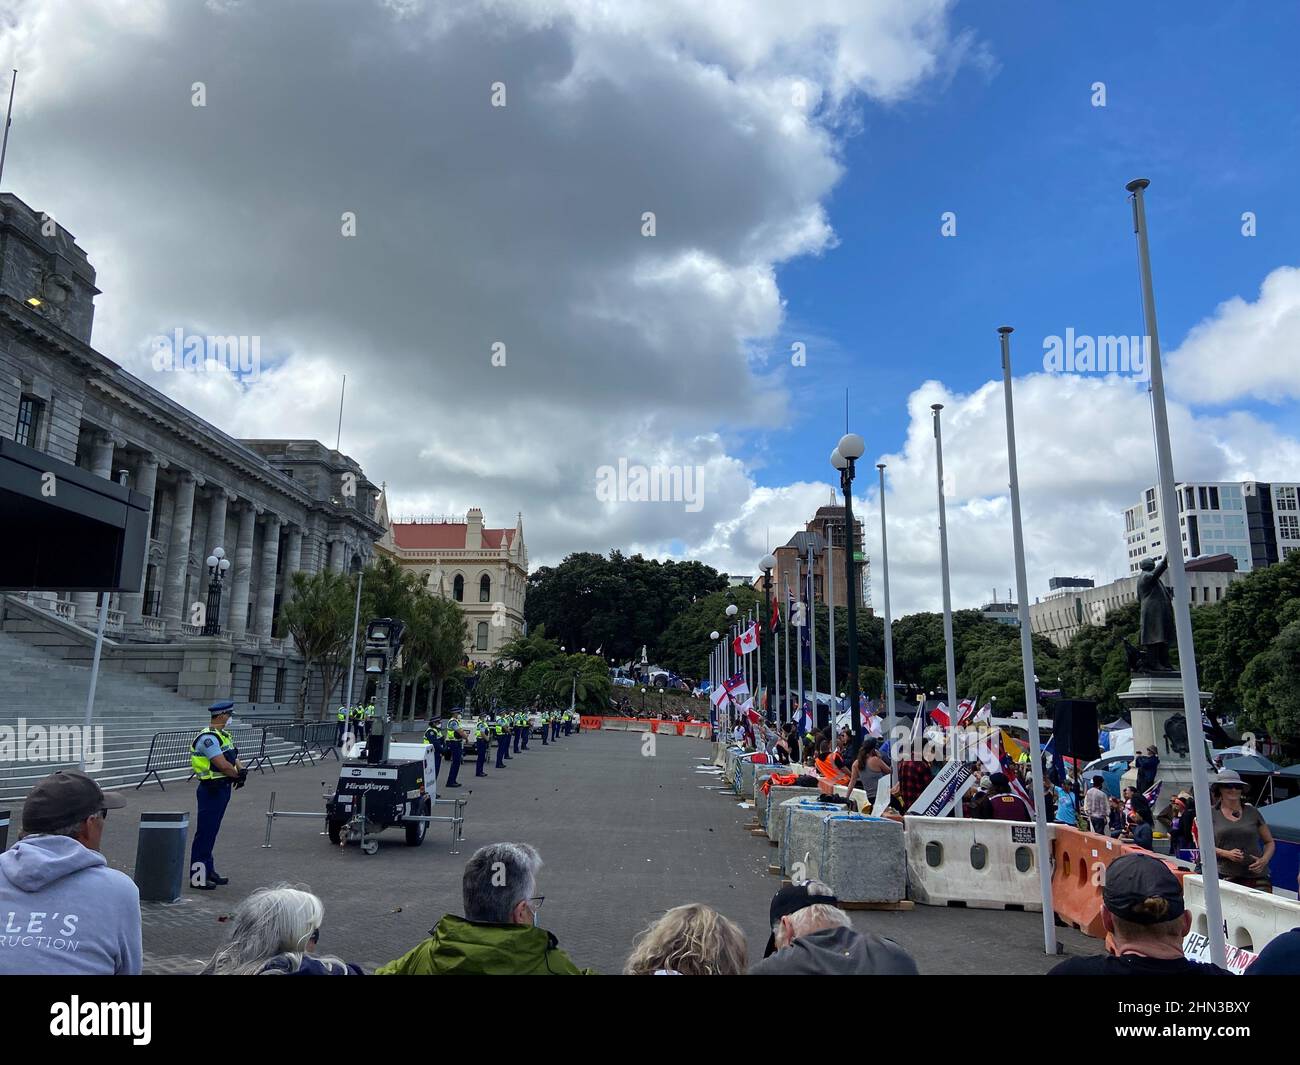 Protesters against the coronavirus disease (COVID-19) restrictions and vaccine mandates gather in front of the parliament in Wellington, New Zealand, February 14, 2022. REUTERS/Praveen Menon Stock Photo